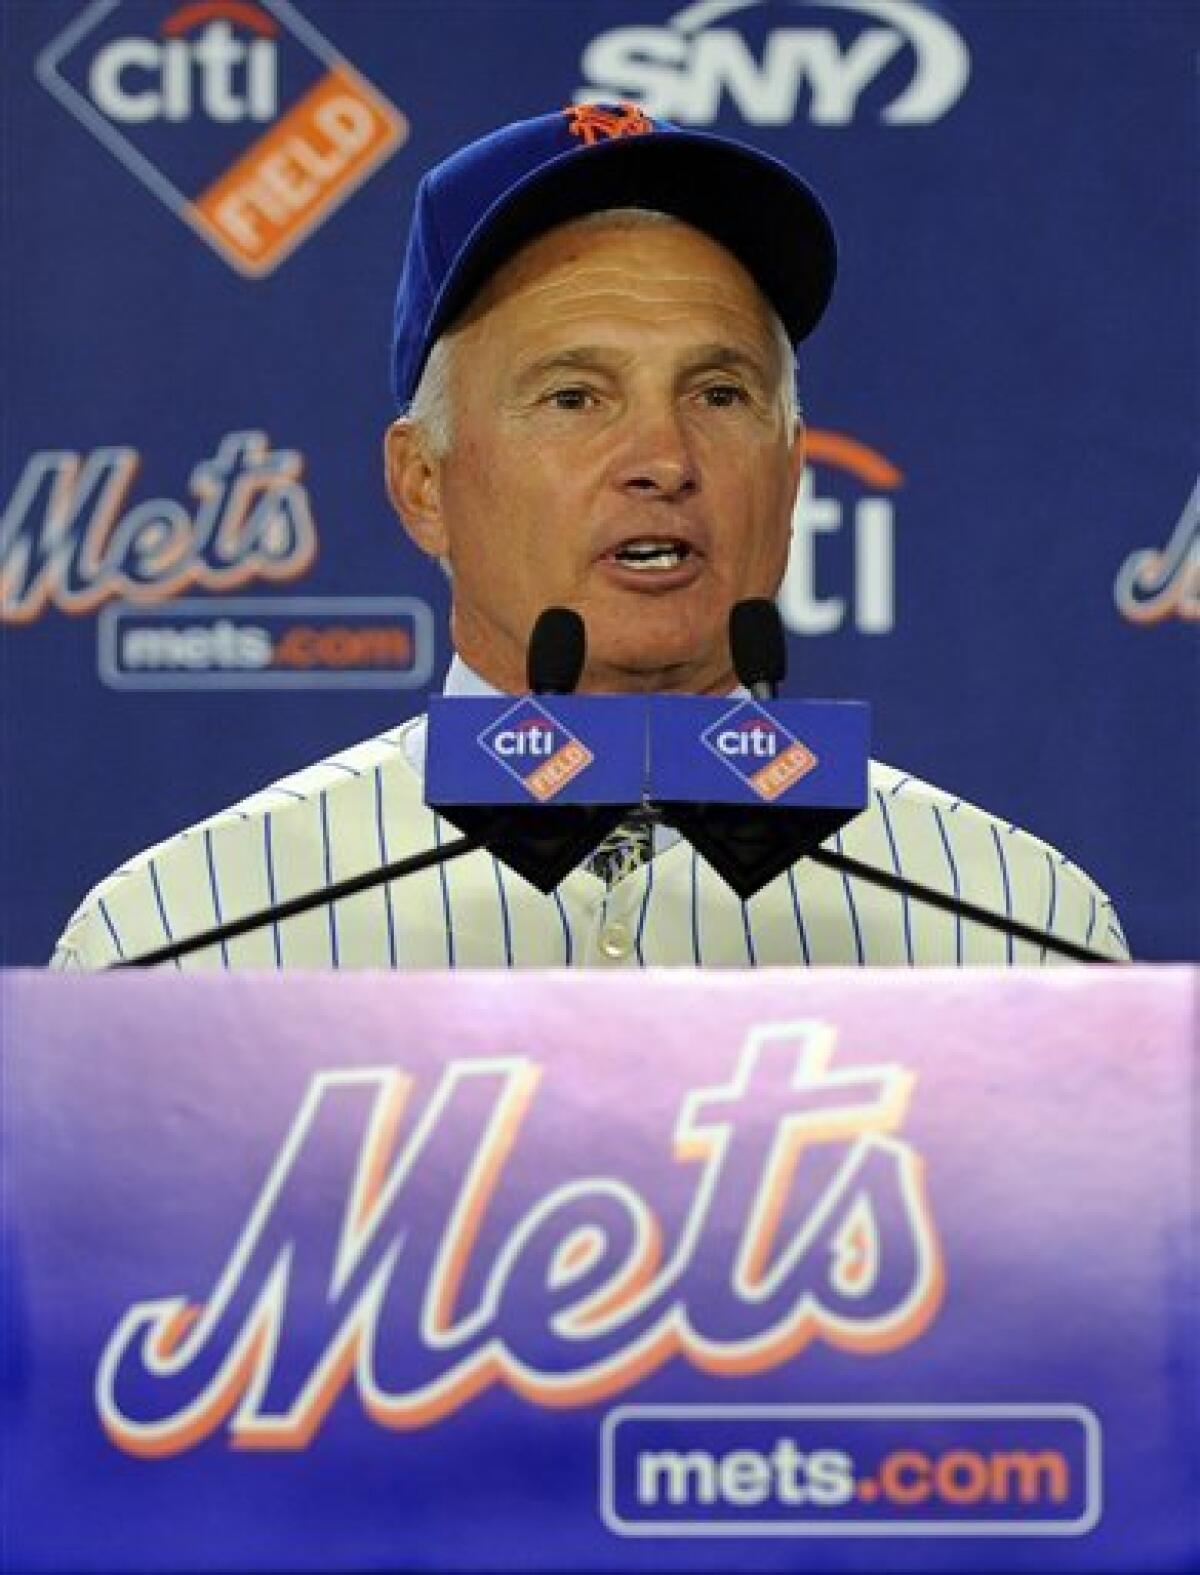 Terry Collins introduced as Mets' manager - The San Diego Union-Tribune